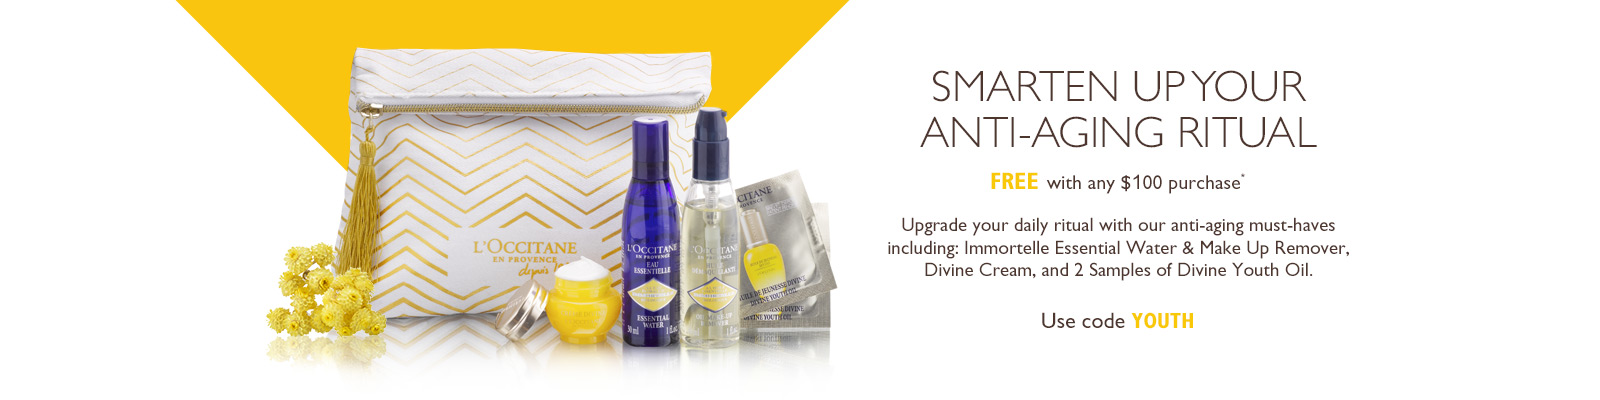 Receive a free 6- piece bonus gift with your $100 L'Occitane purchase